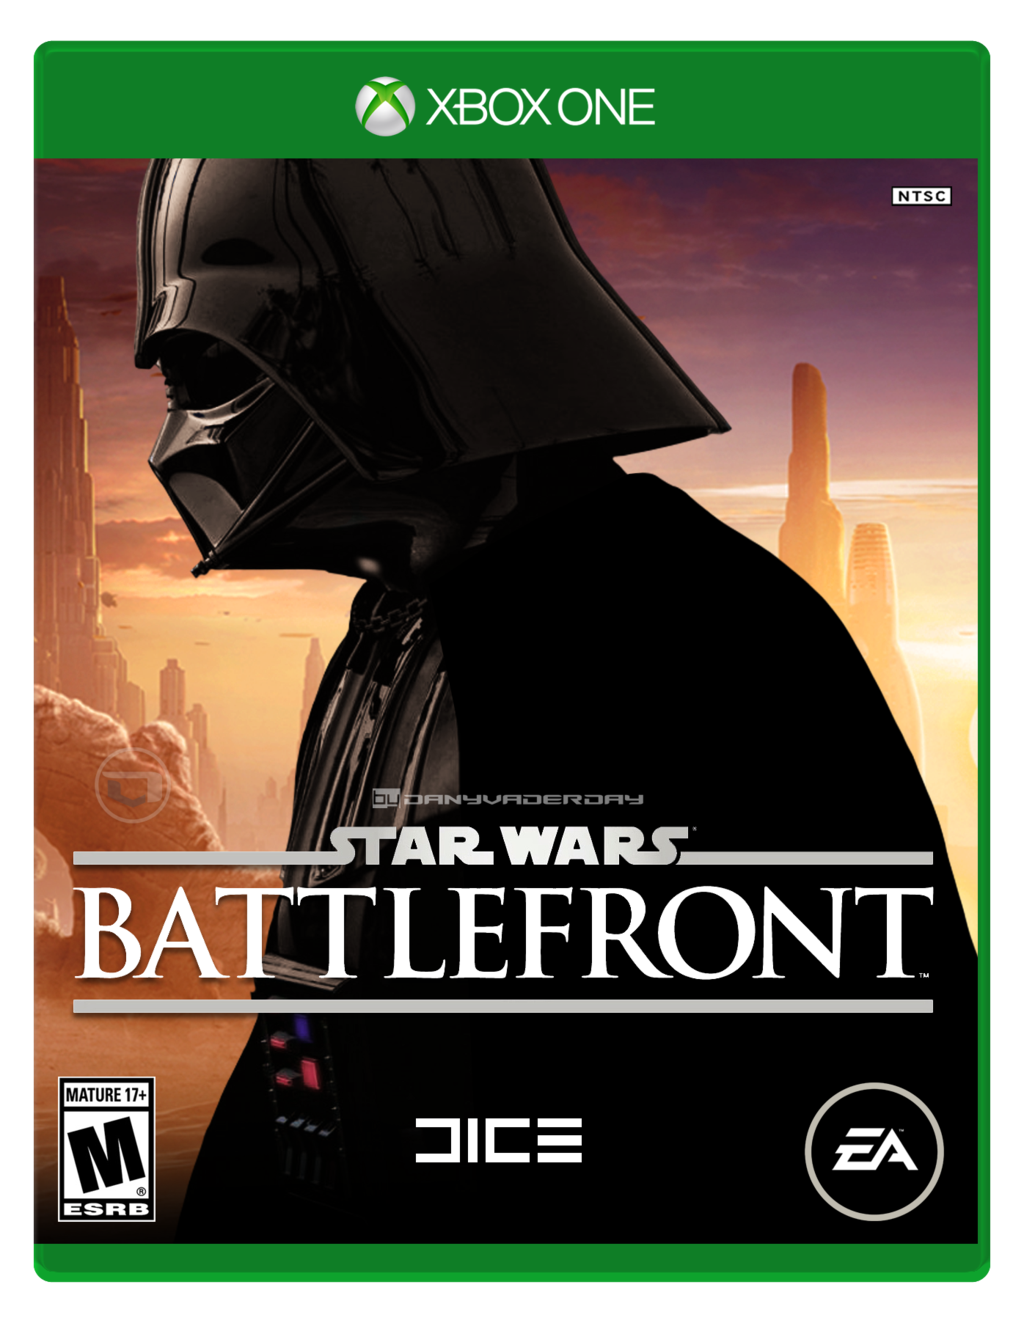 Star Wars Battlefront Fan Made Boxart By Danyvaderday On